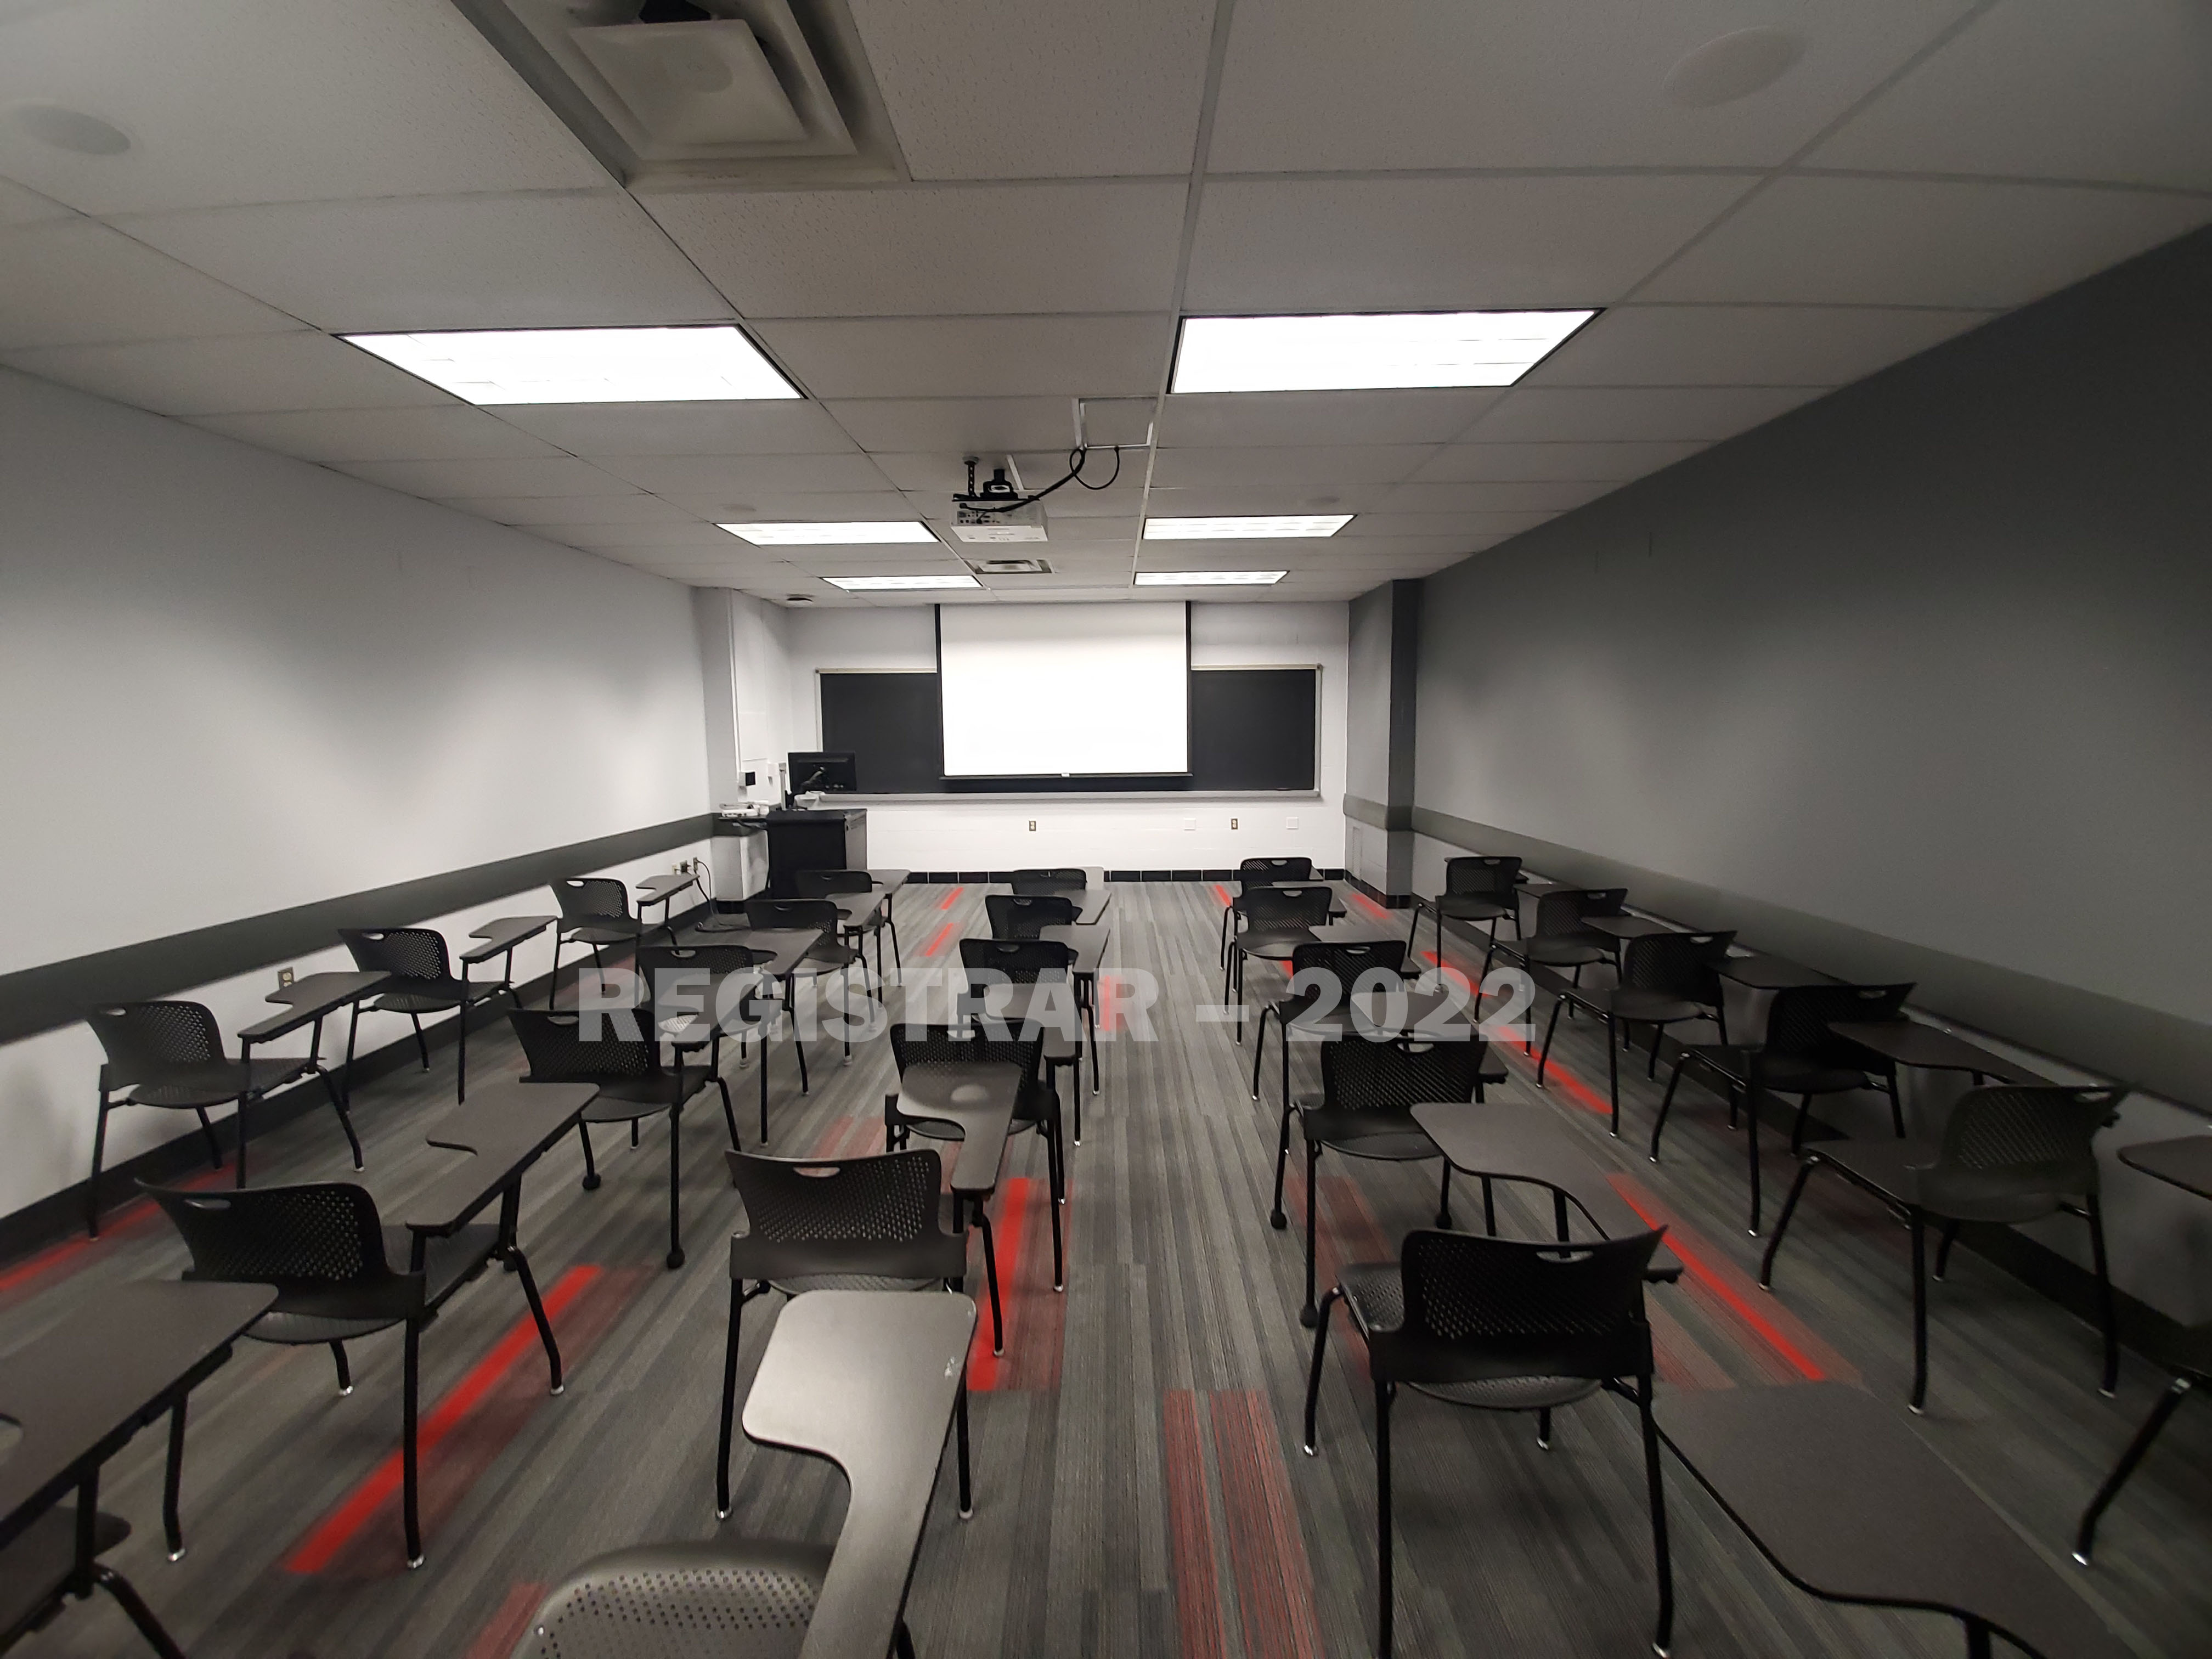 Baker Systems Engineering room 184 ultra wide angle view from the back of the room with projector screen down